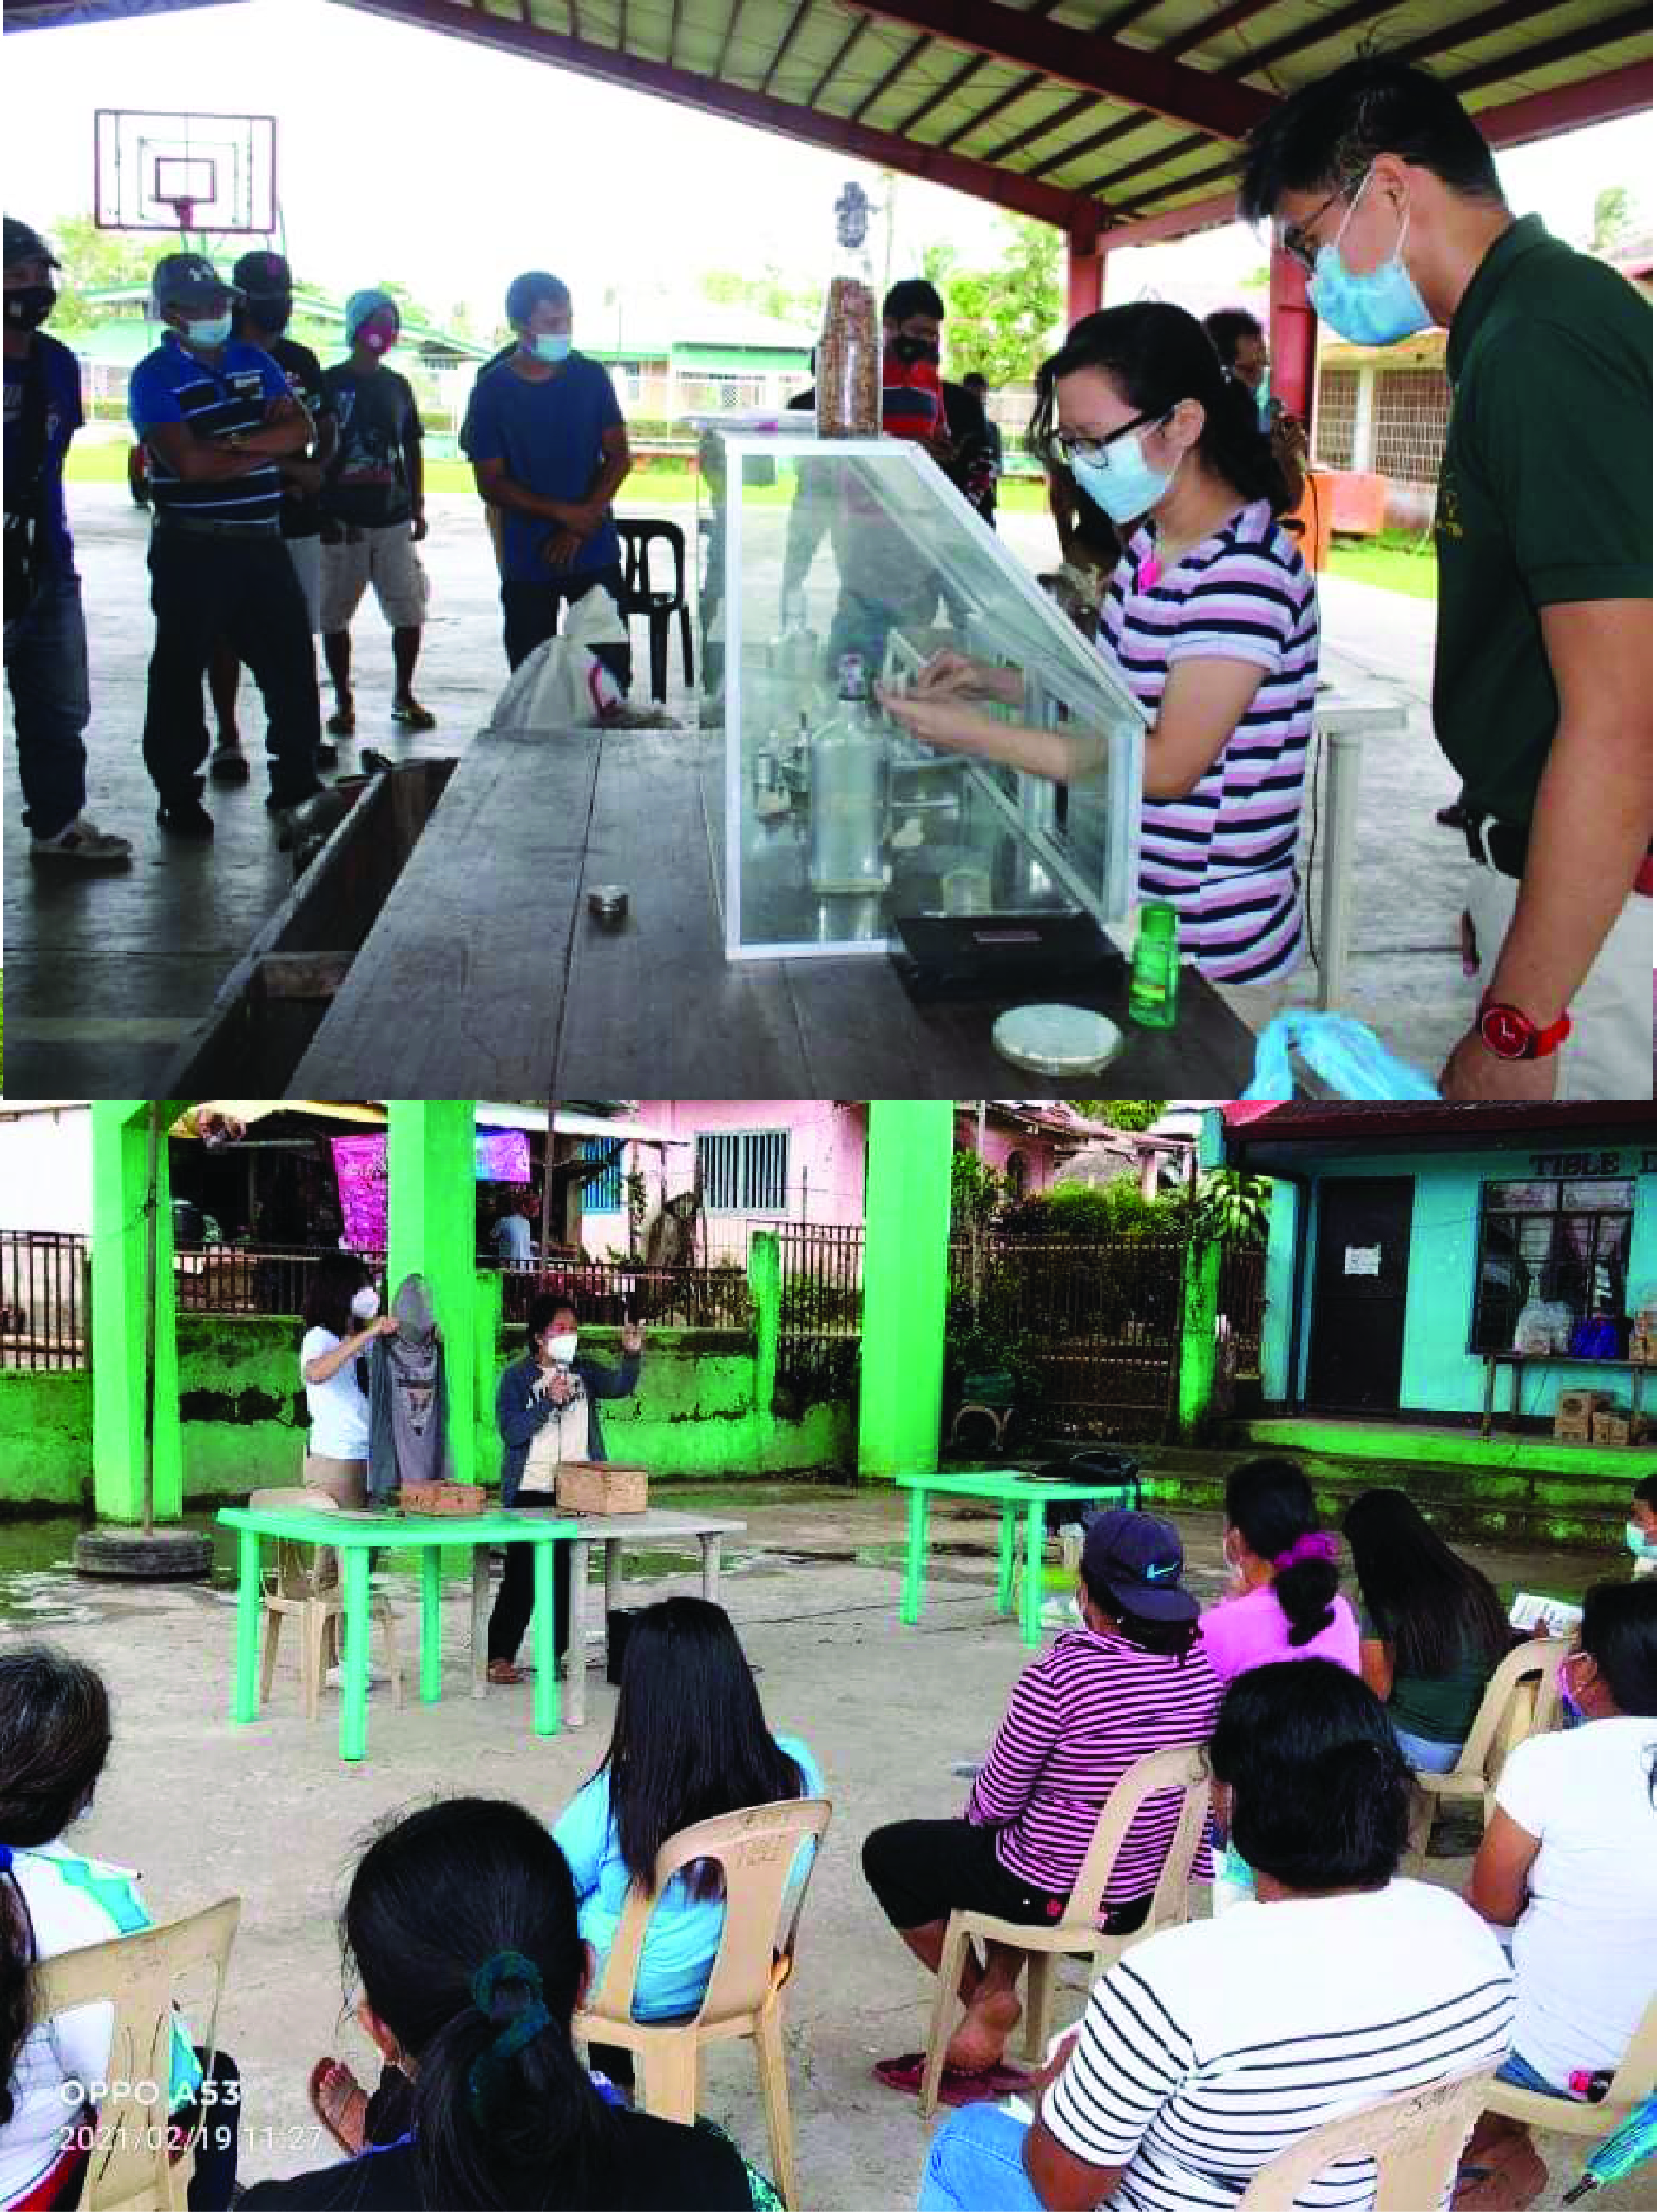 CBSUA Sipocot campus conducts extension activities in Cabusao and Sipocot